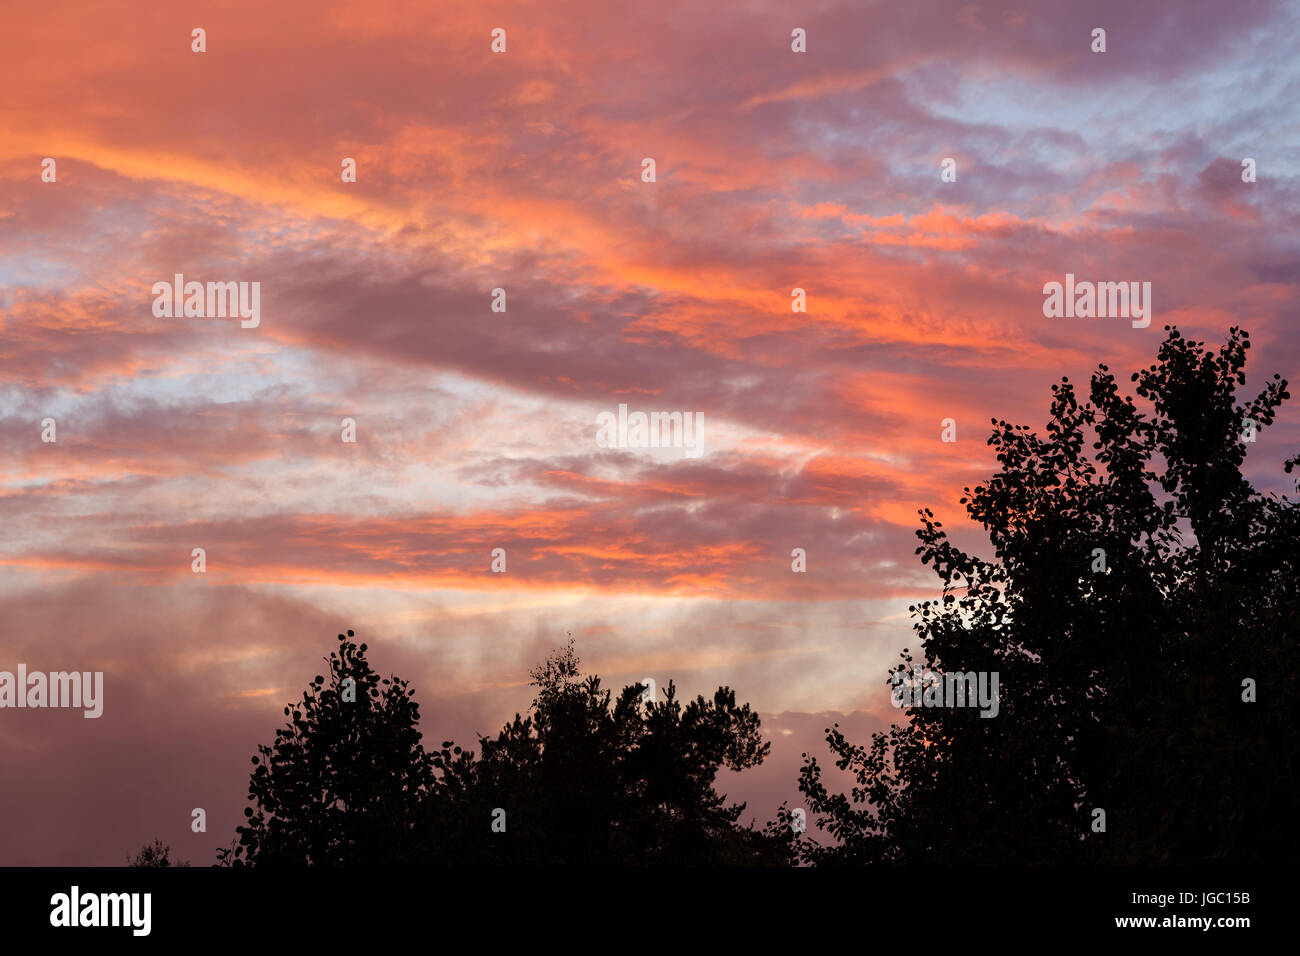 Treetop silhouettes and vibrant sunset clouds Stock Photo